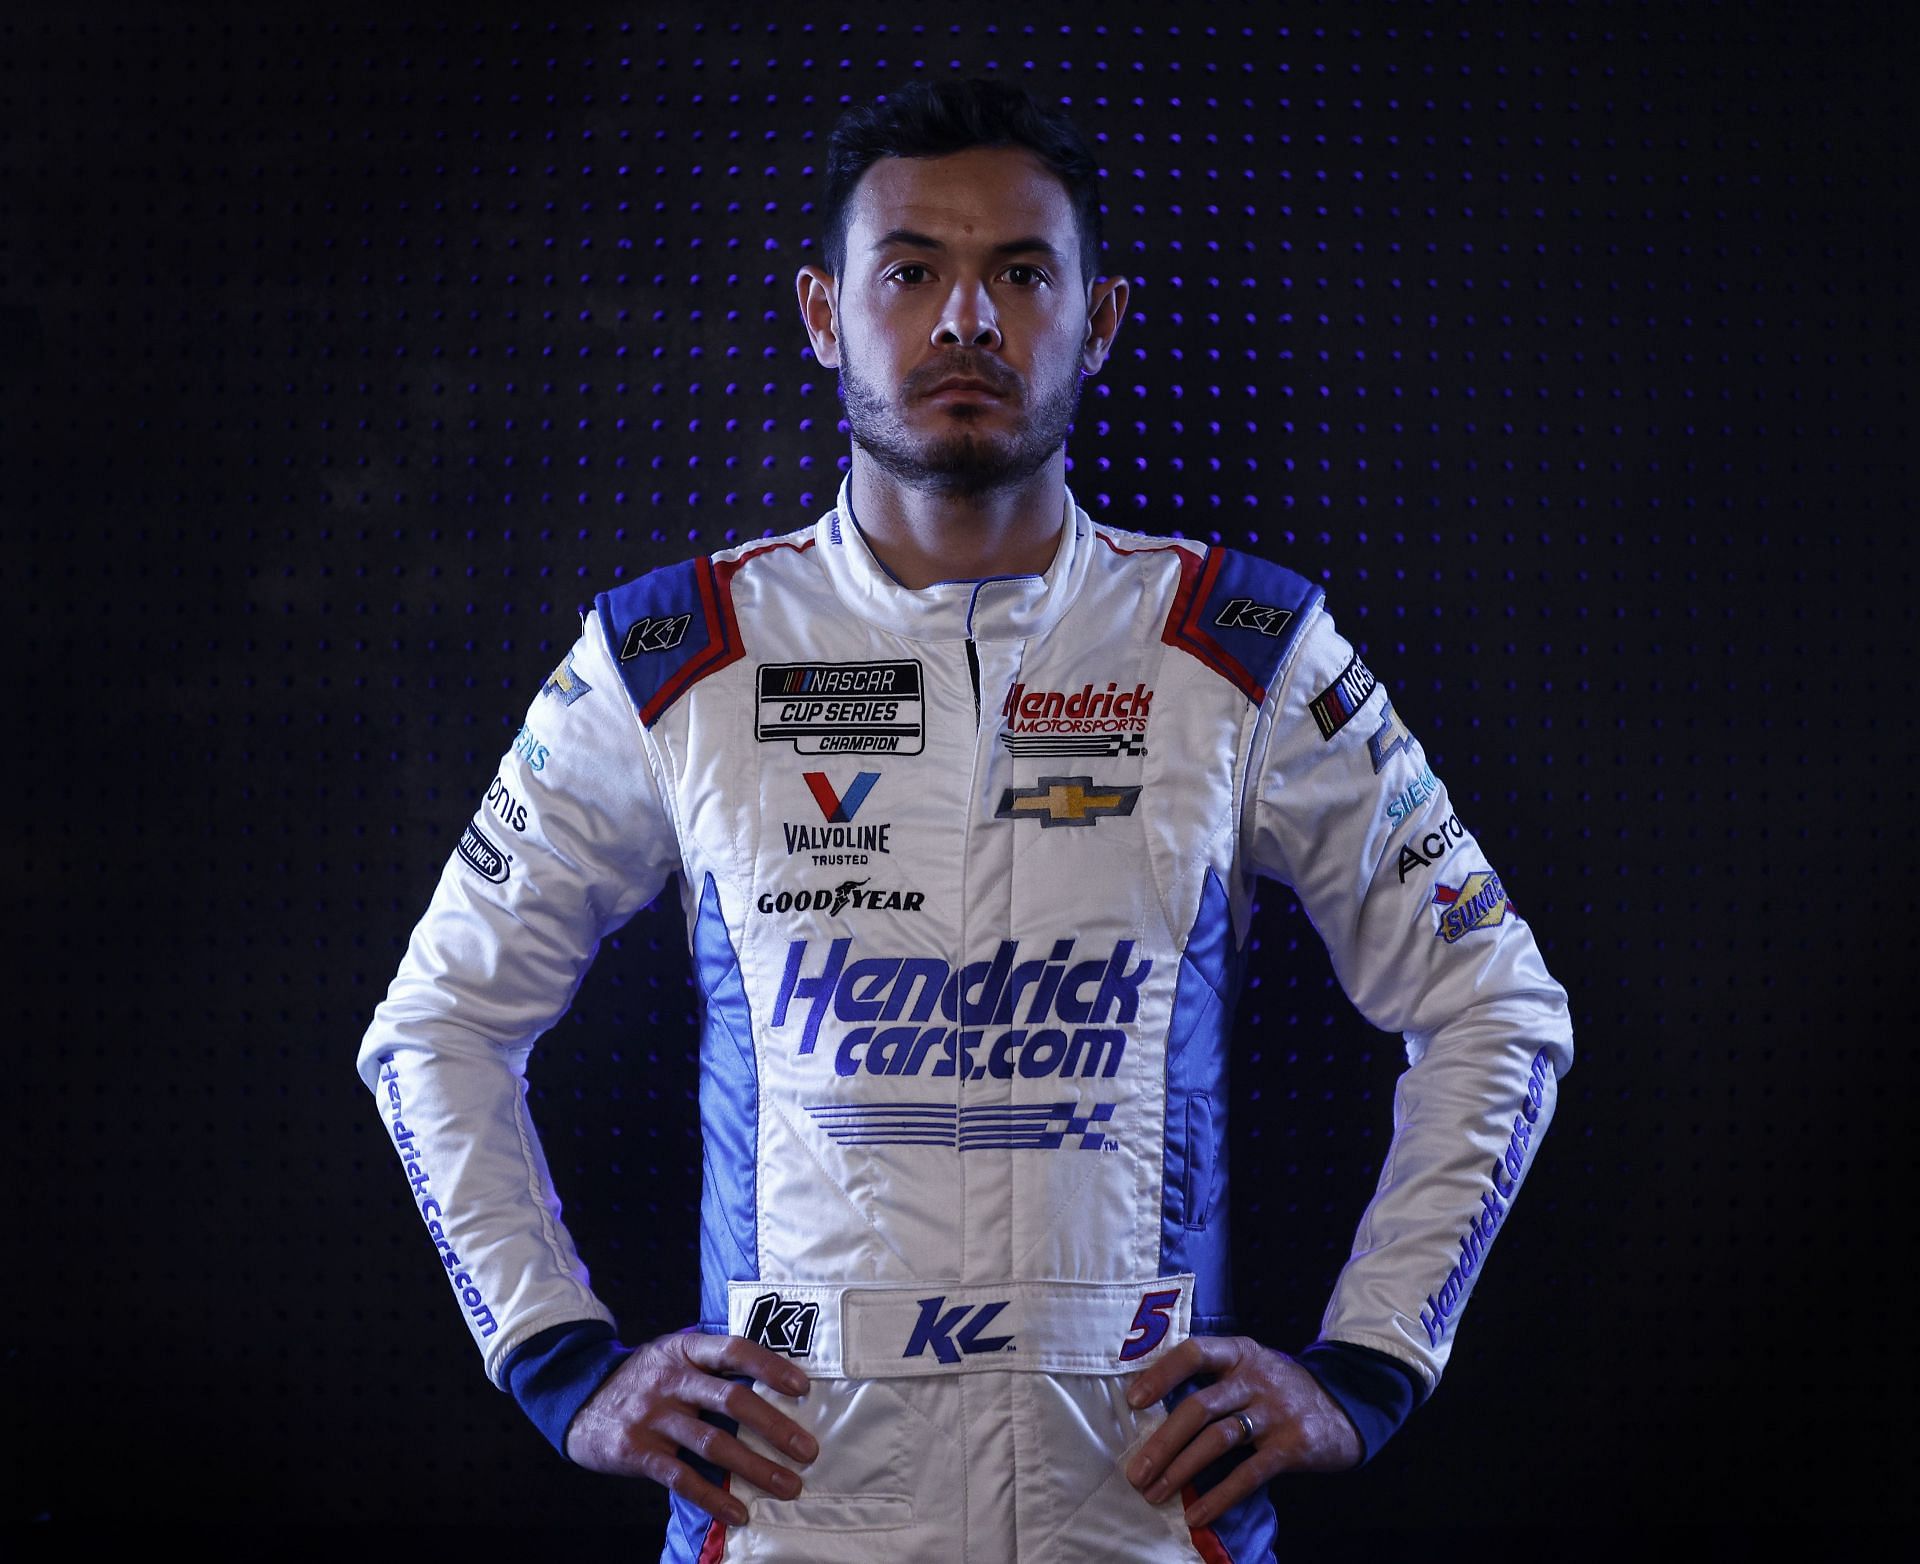 NASCAR driver Kyle Larson poses for a photo during NASCAR Production Days at Clutch Studios.